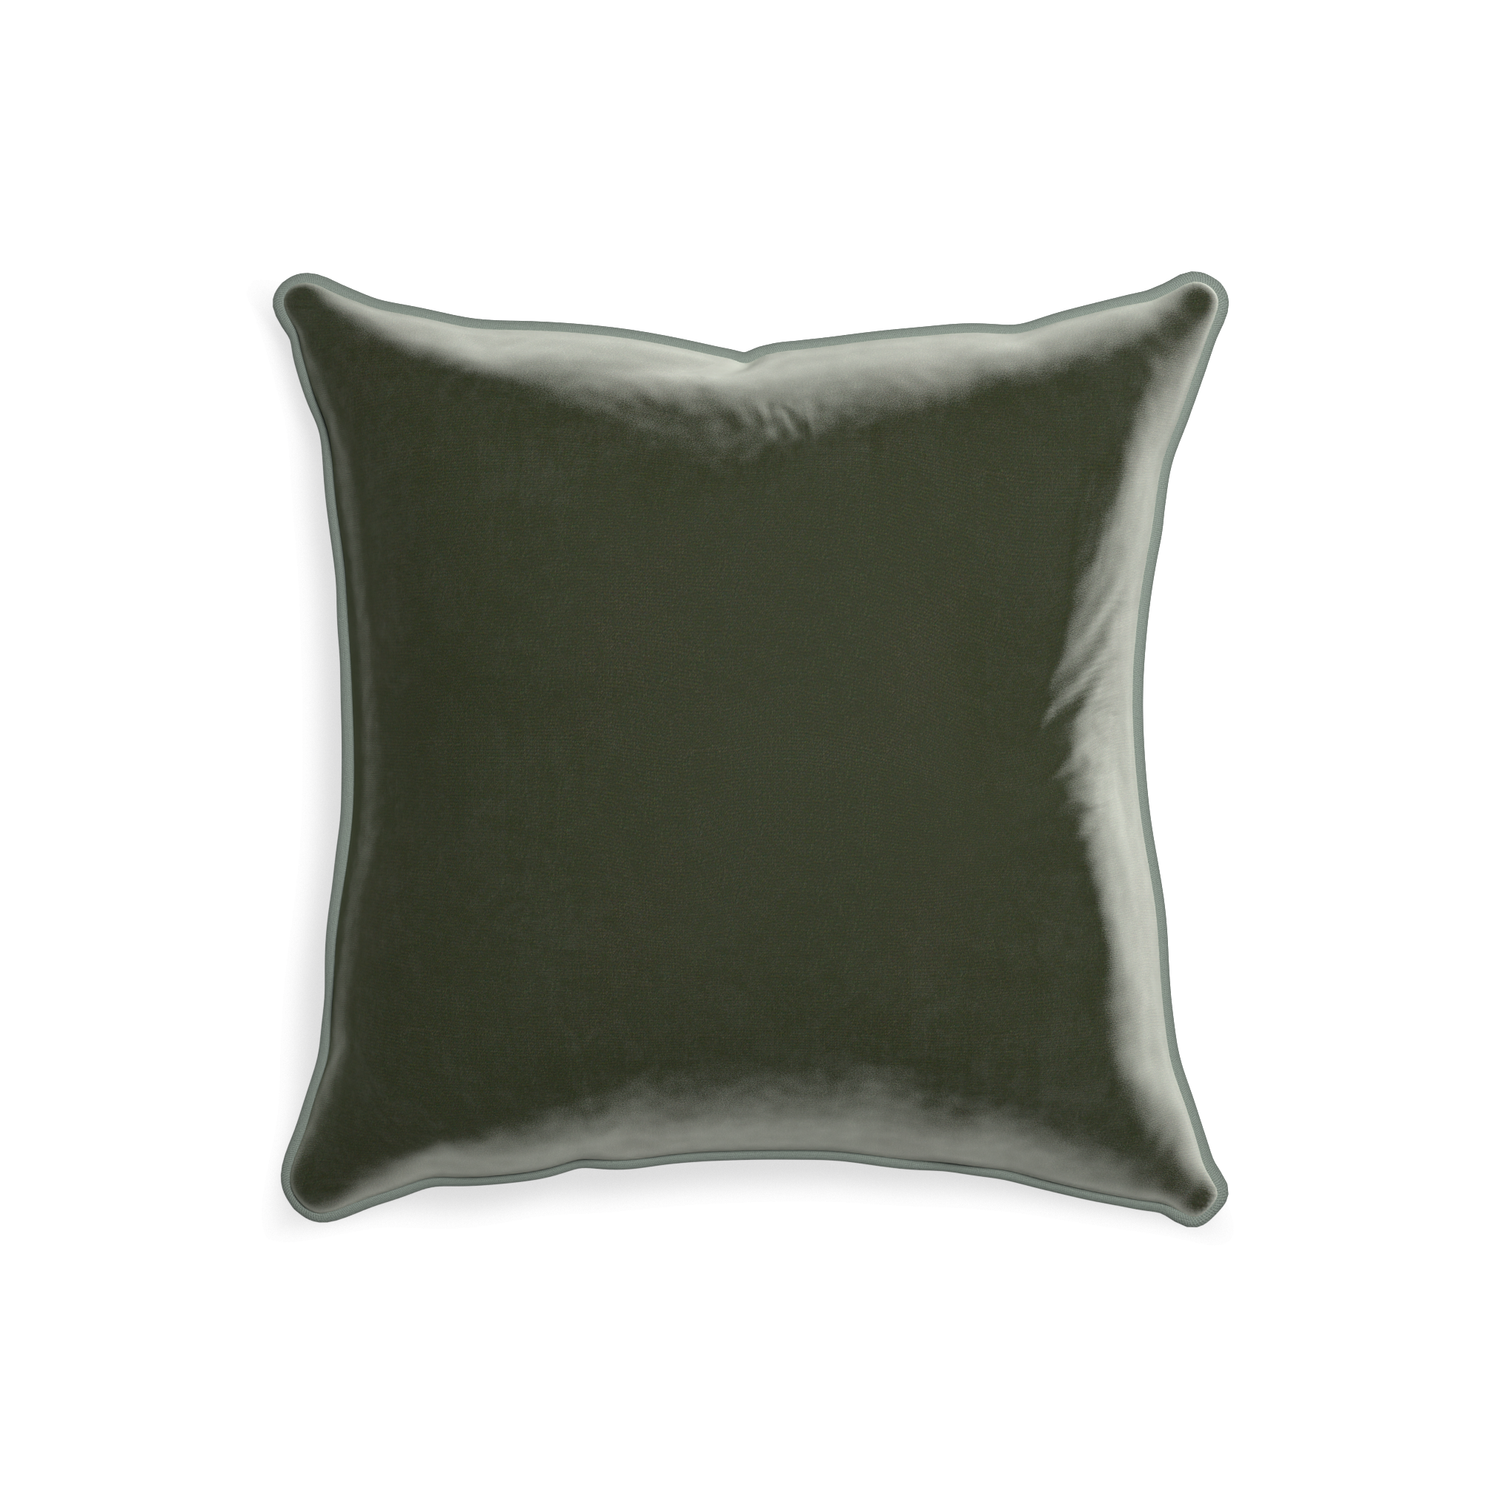 20-square fern velvet custom fern greenpillow with sage piping on white background